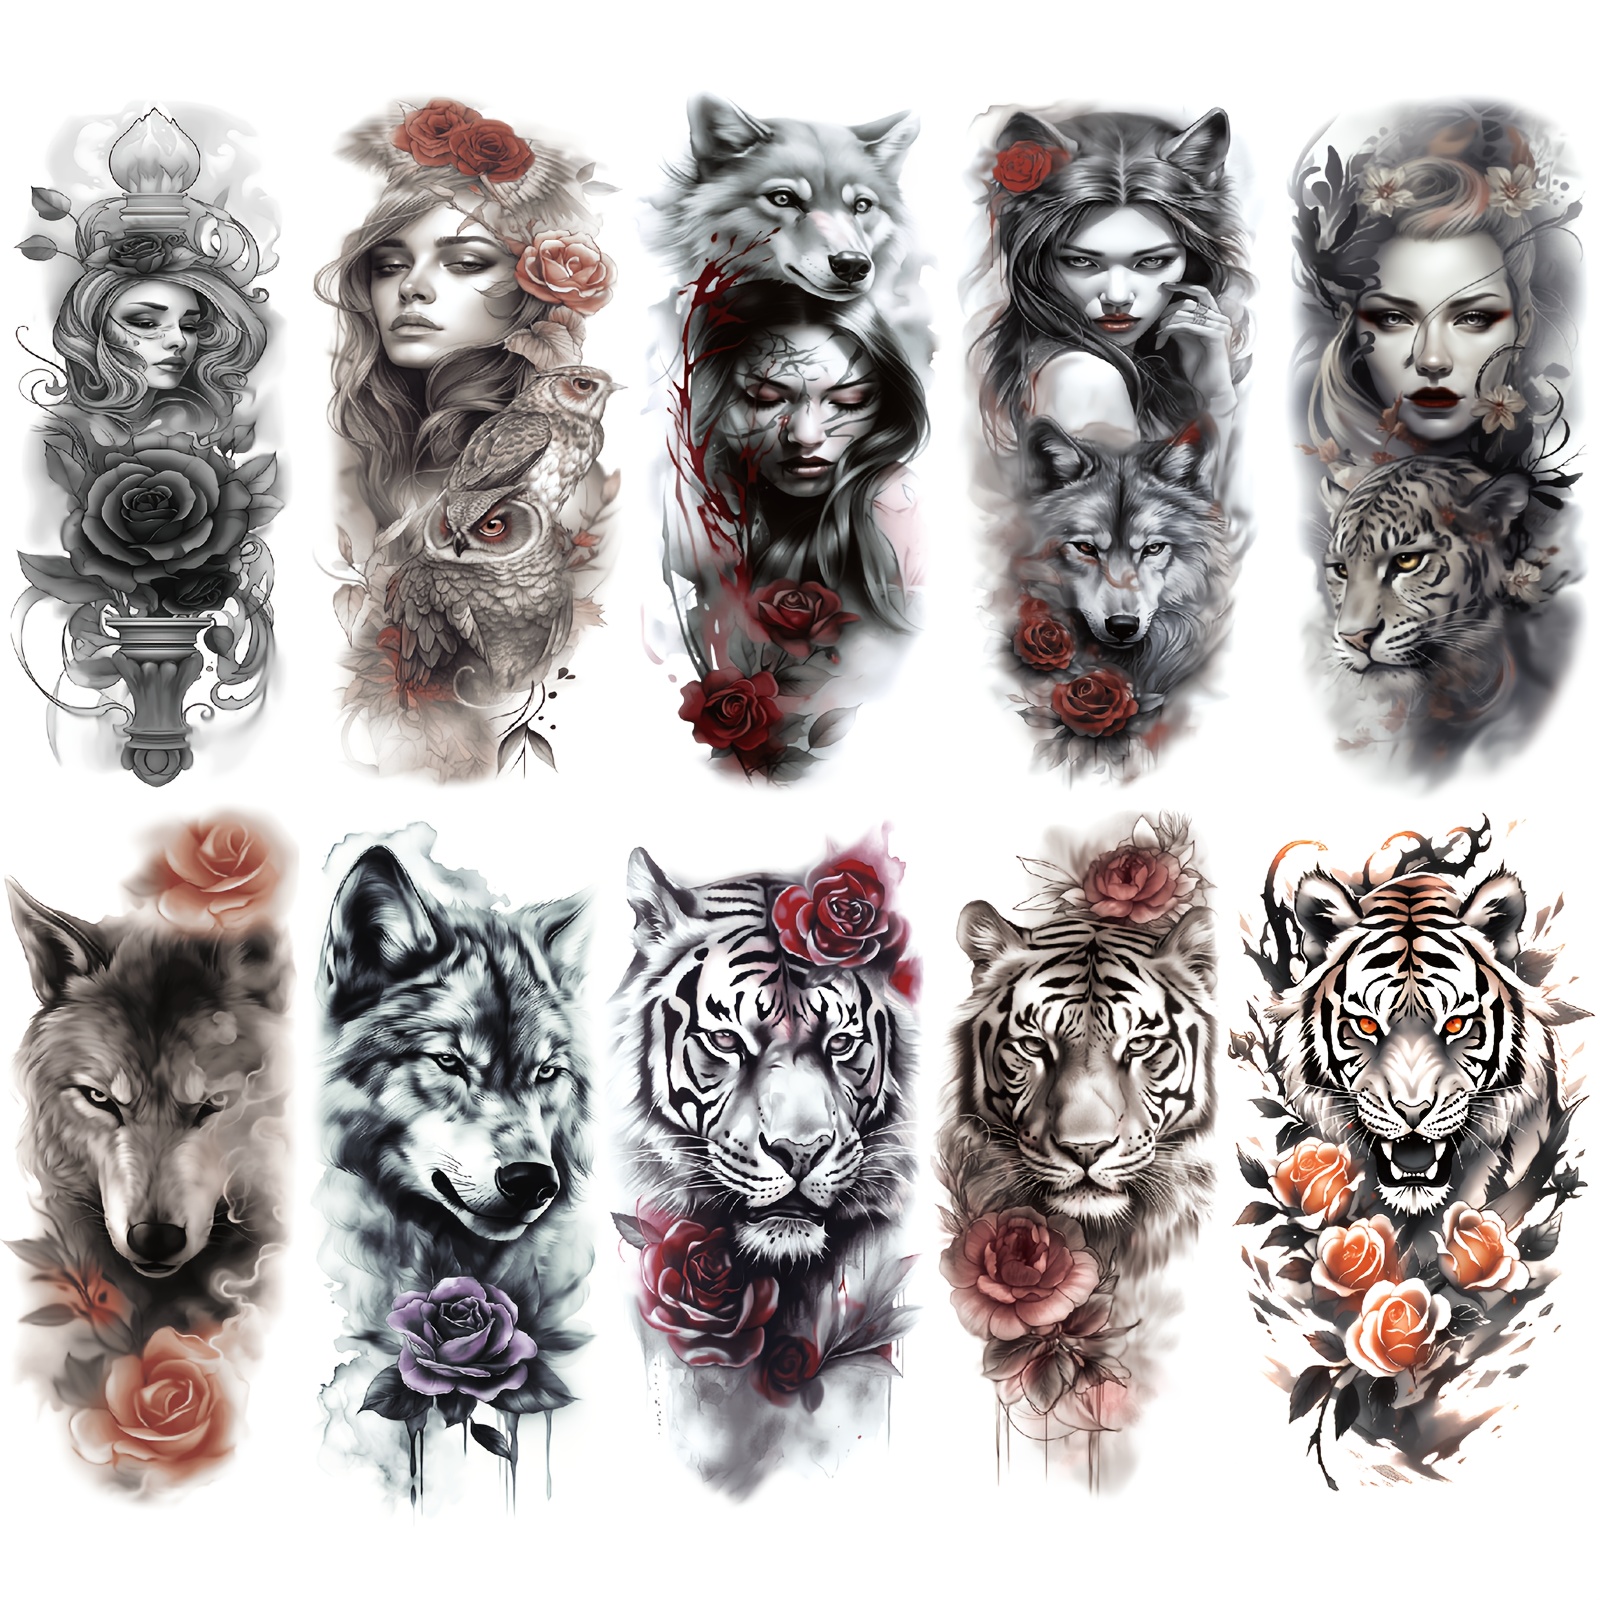 

10pcs Tiger Wolf Rose Flower And Beauty Arm Temporary Tattoos For Men Women Adults, Body Art Large Half Arm Sleeve Temporary Tattoo Stickers, Waterproof Realistic Tattoo Temporary Tattoo Stickers